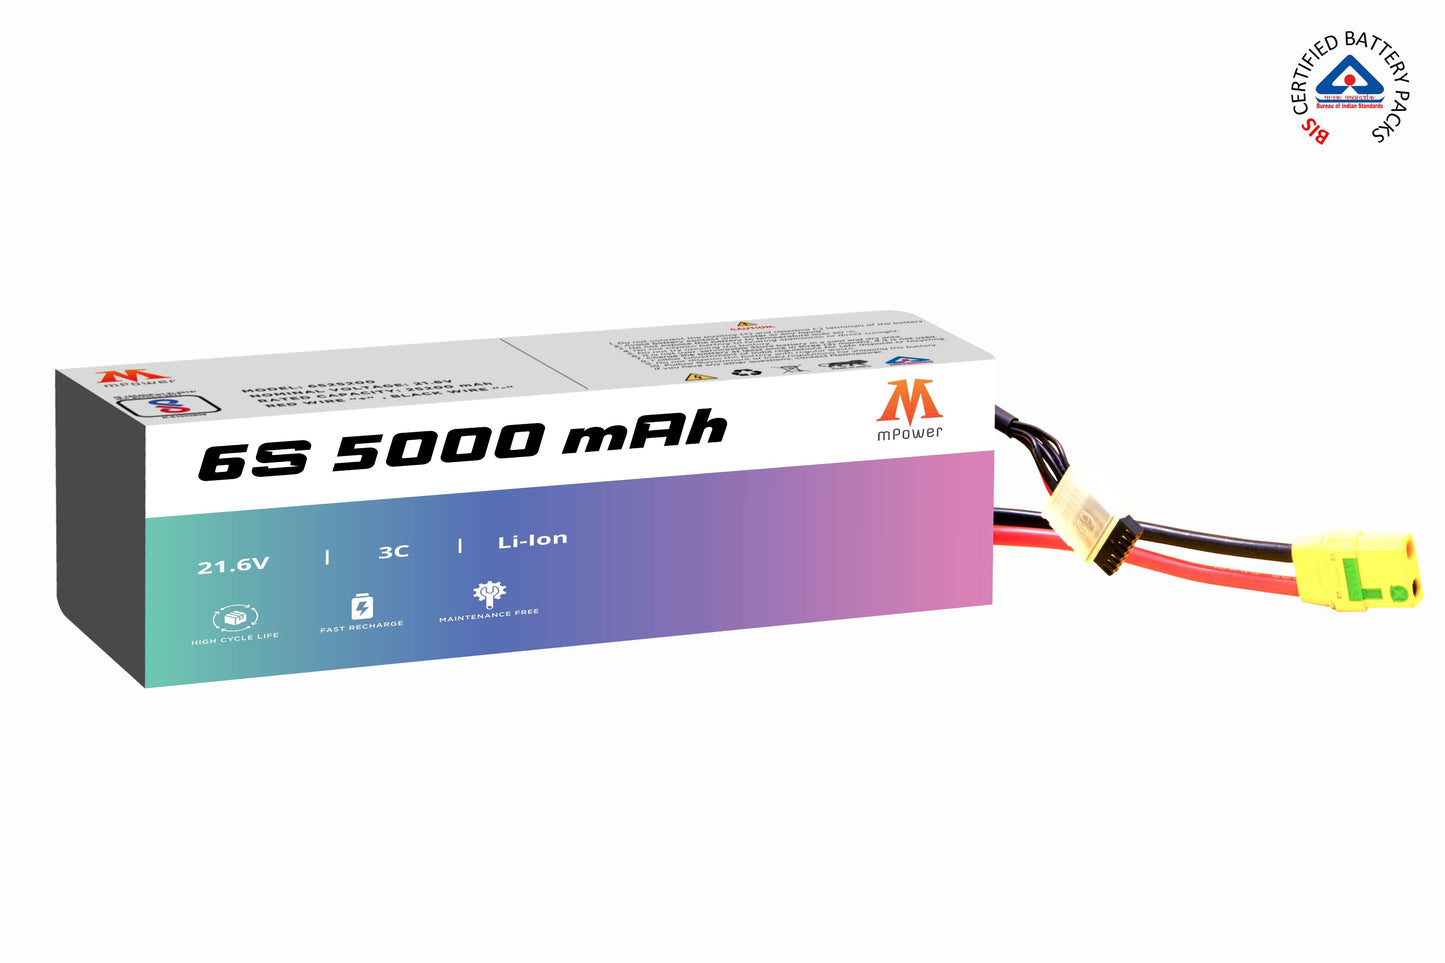 mPower 6S 5000mAh Lithium-Ion Battery for Surveillance Drones